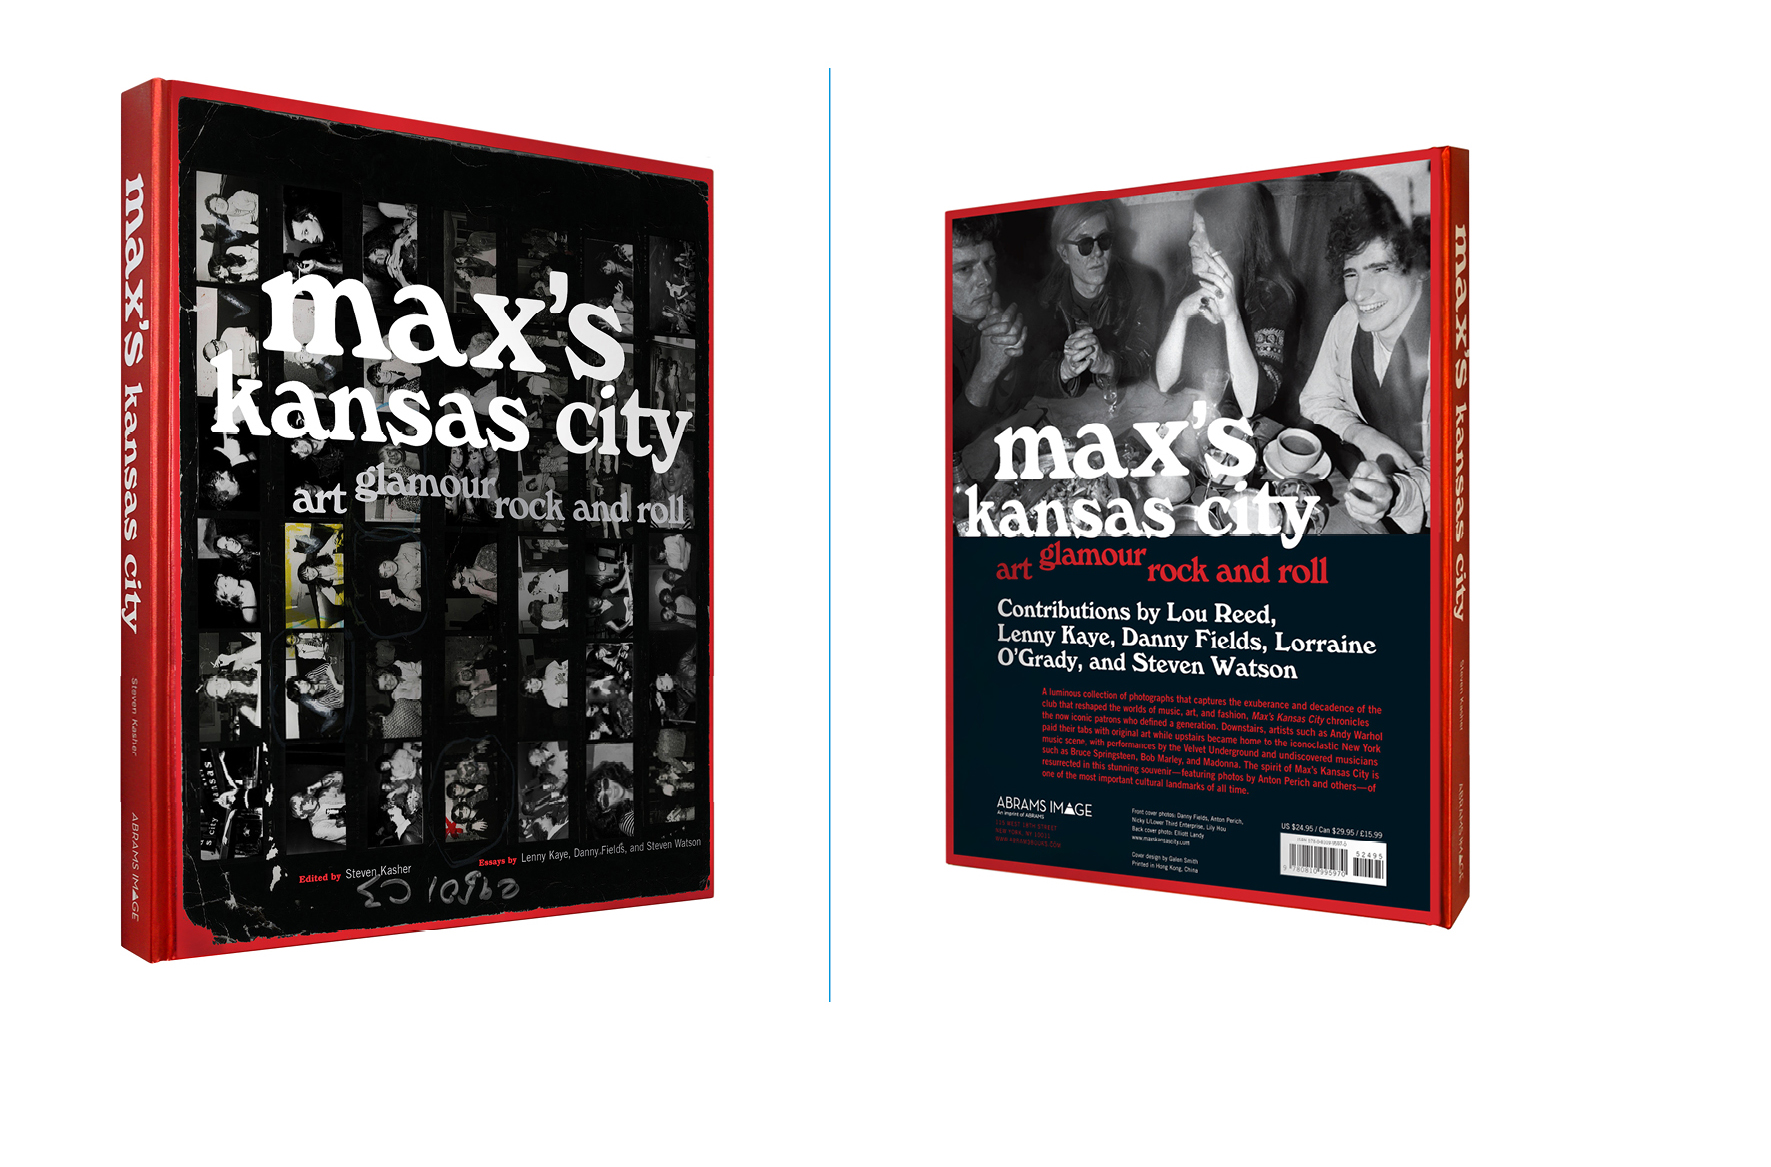   Max’s Kansas City -  9 X 11 in., 160 pg., hardcover, 4-color and matte white on metallic case wrap. Design; Galen Smith // Publisher; Abrams Image 